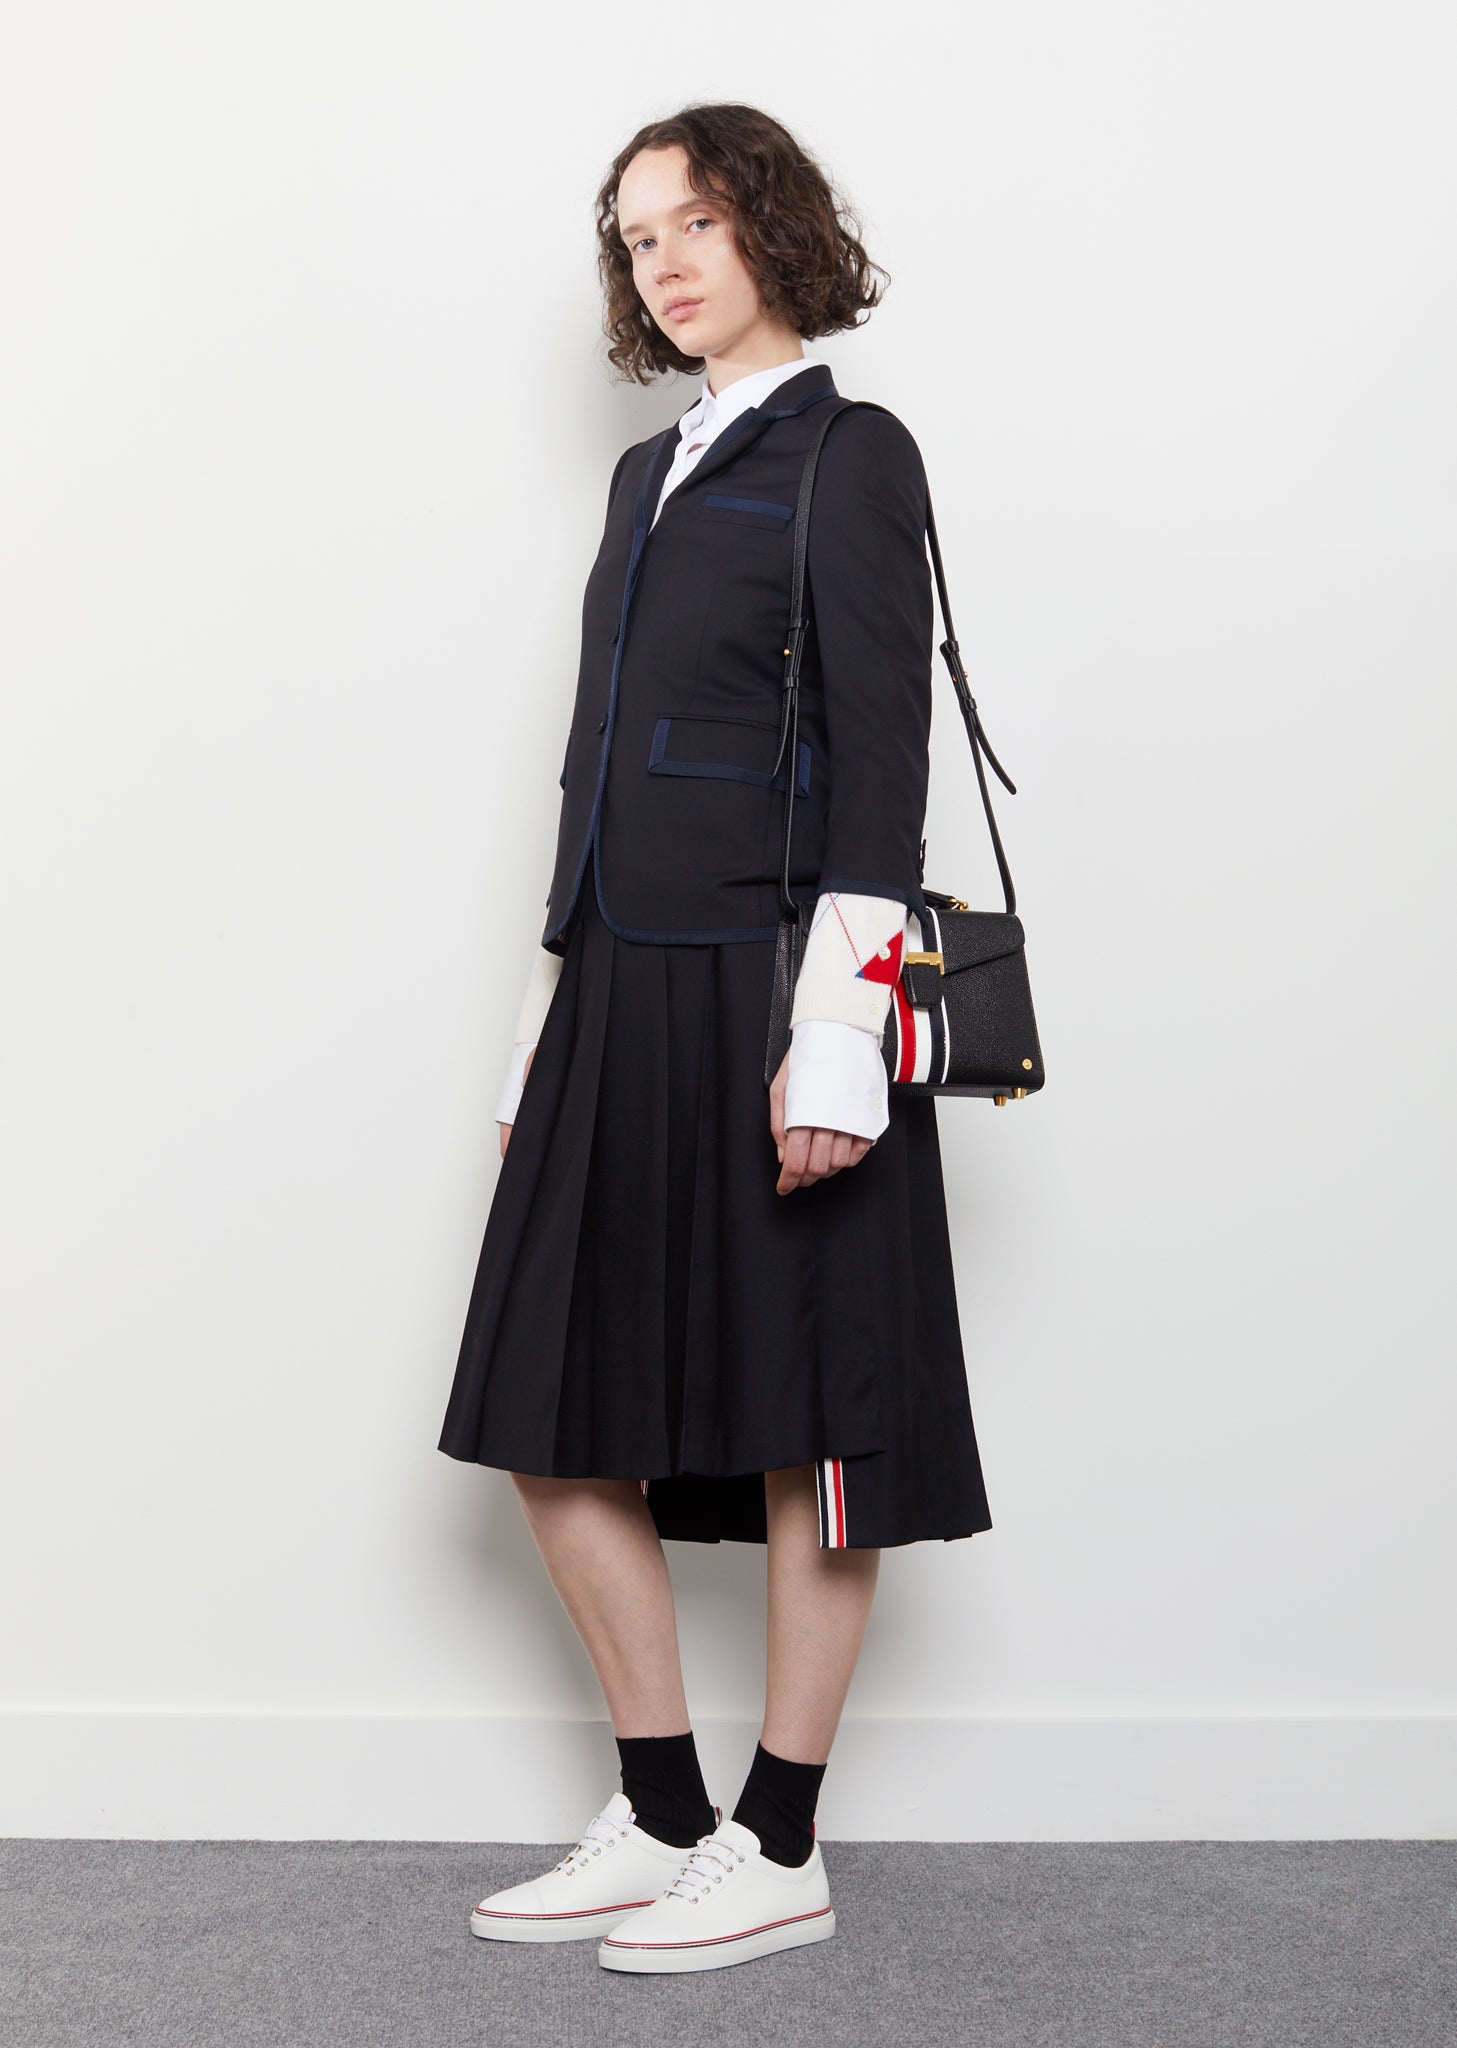 Thom Browne Takes “Doggy Bags” Very Literally for Resort 2017 - PurseBlog